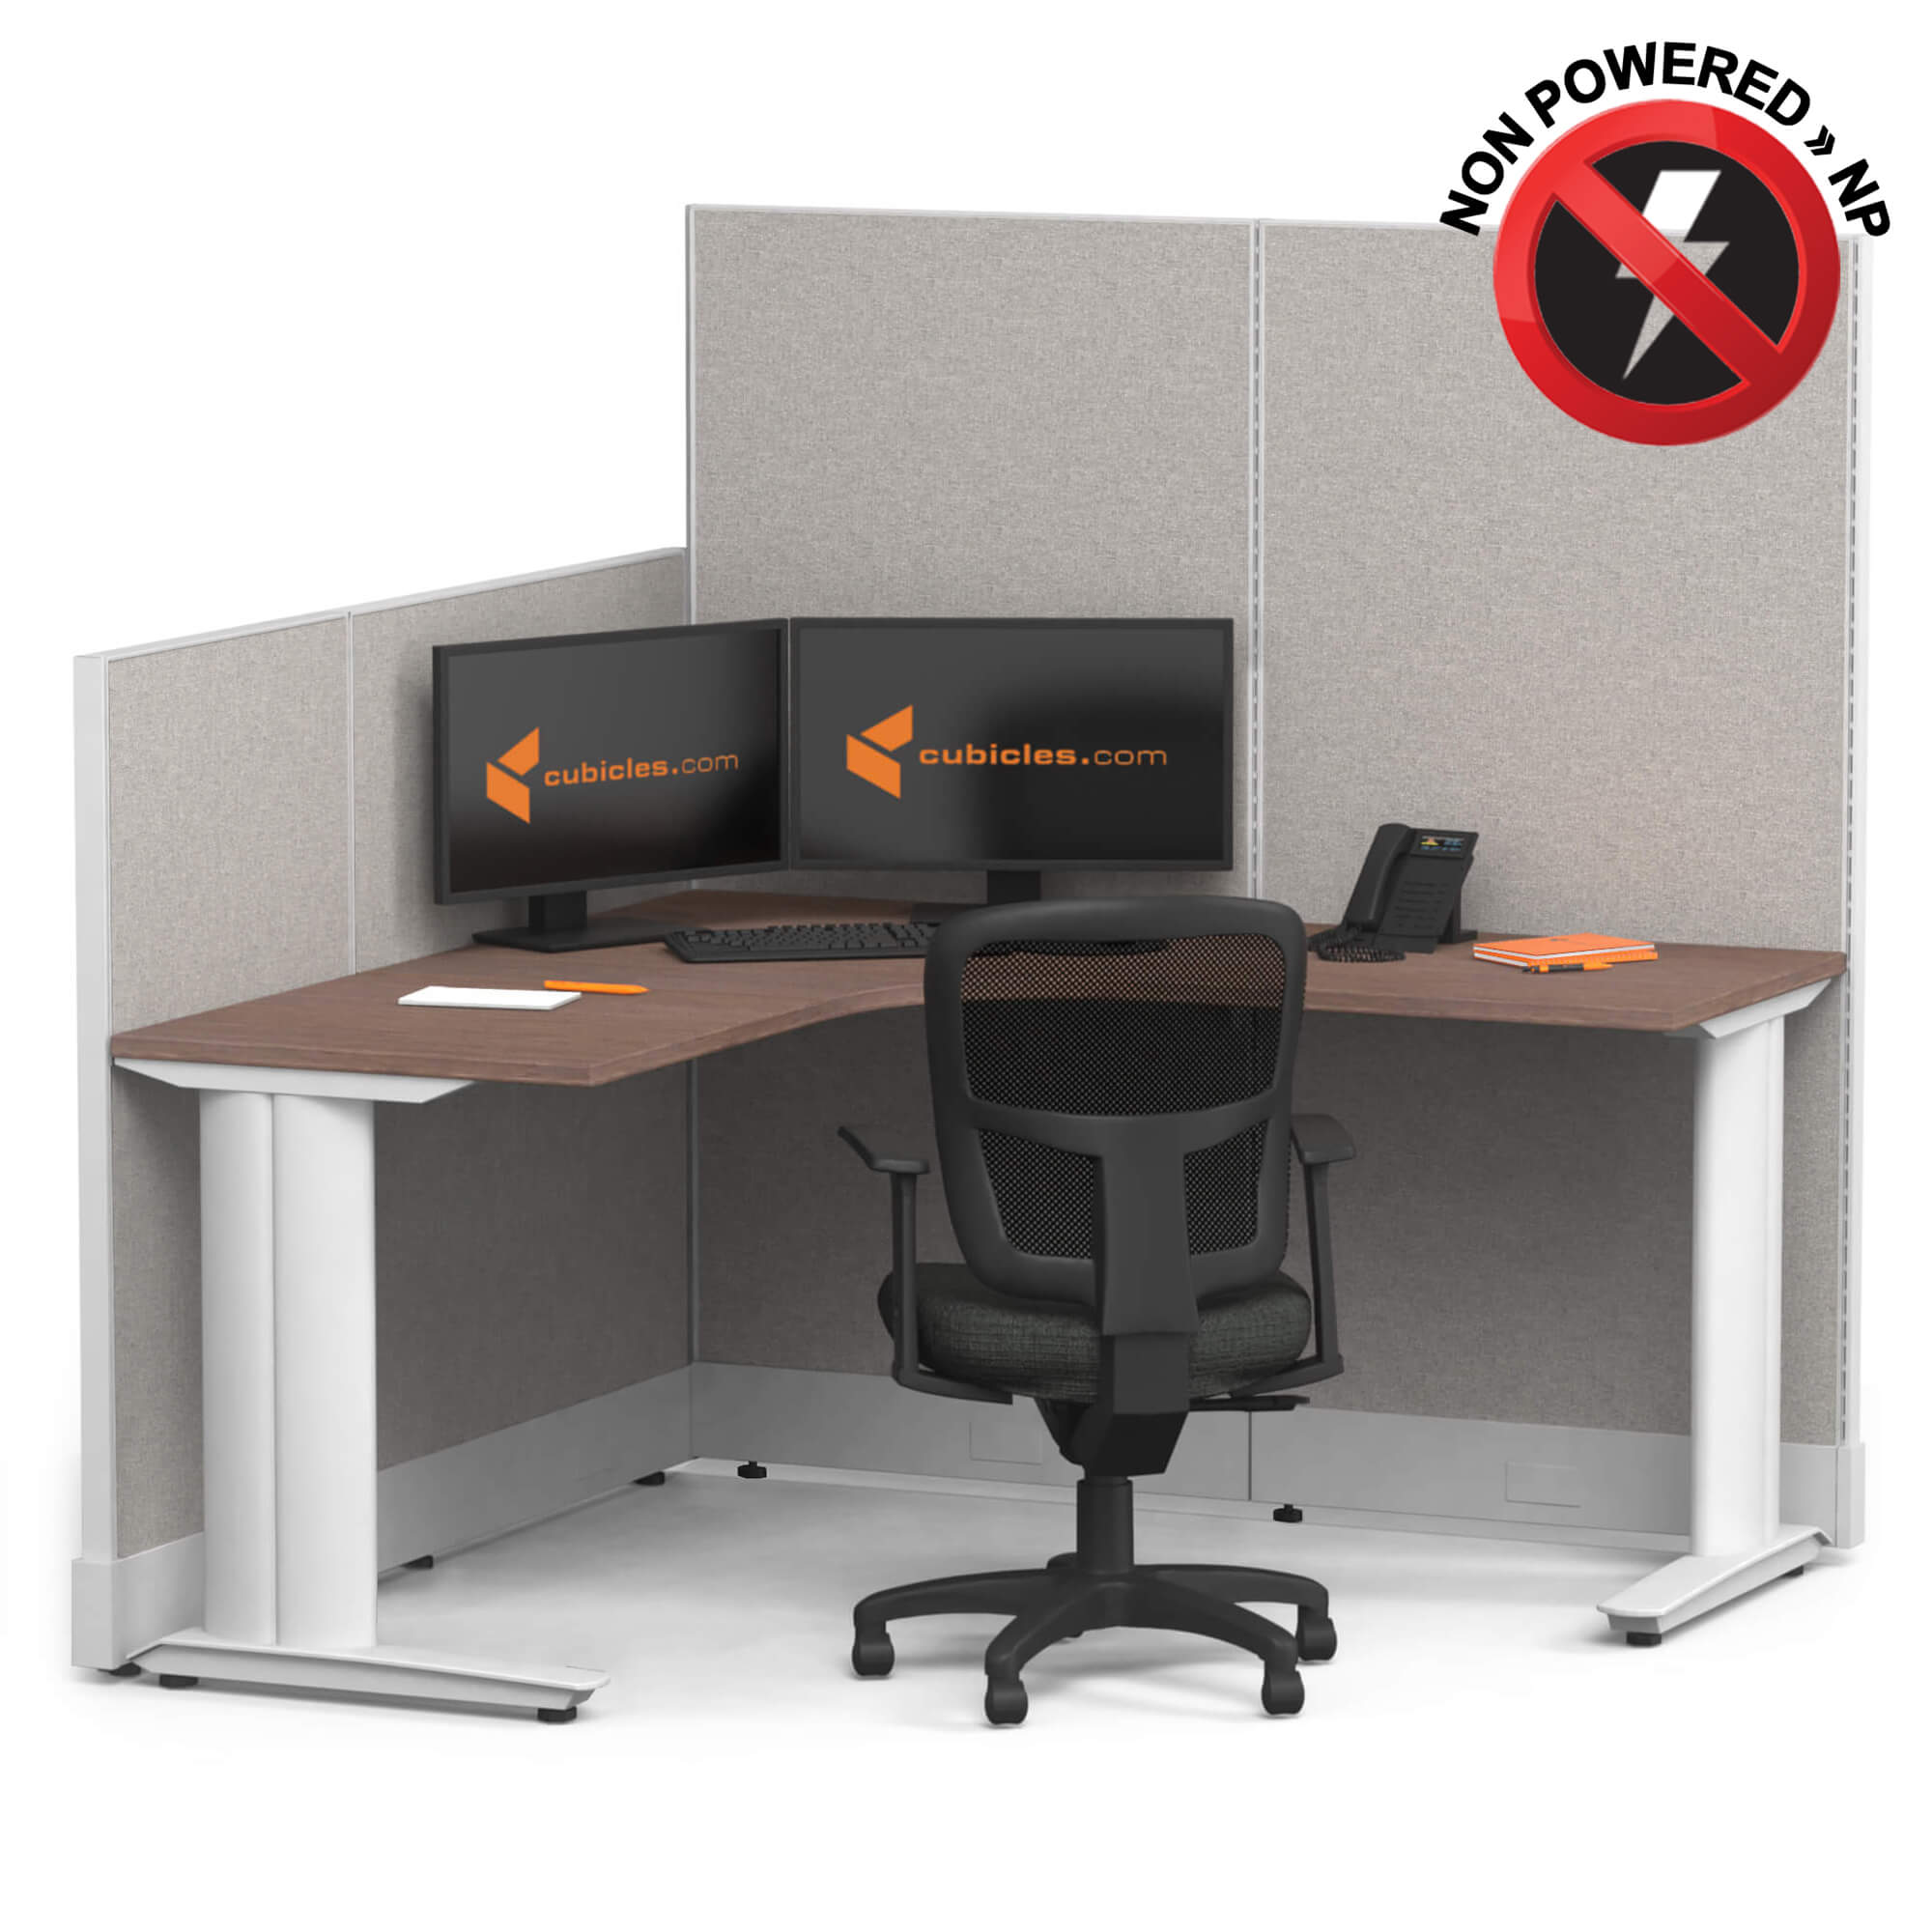 Cubicle desk l shaped workstation non powered sign